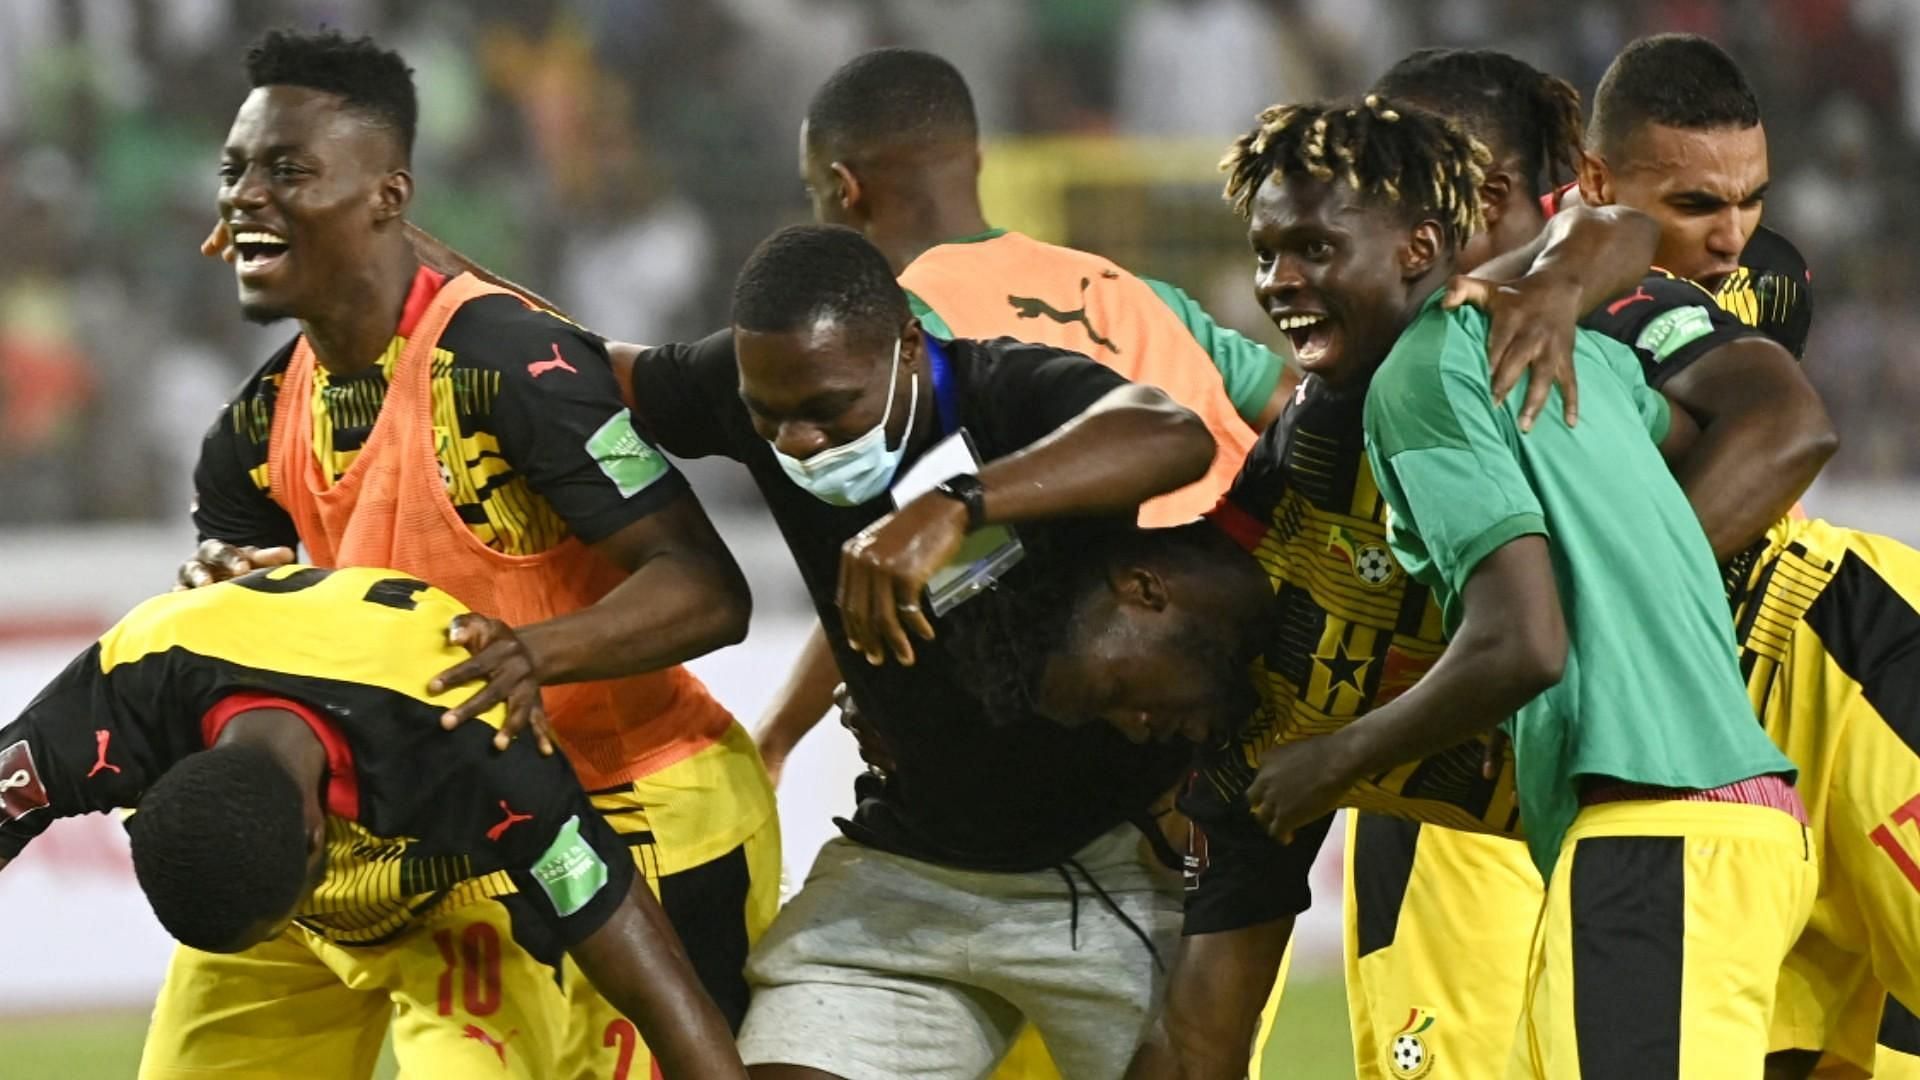 Ghana to airlift 500 fans to Brazil for World Cup